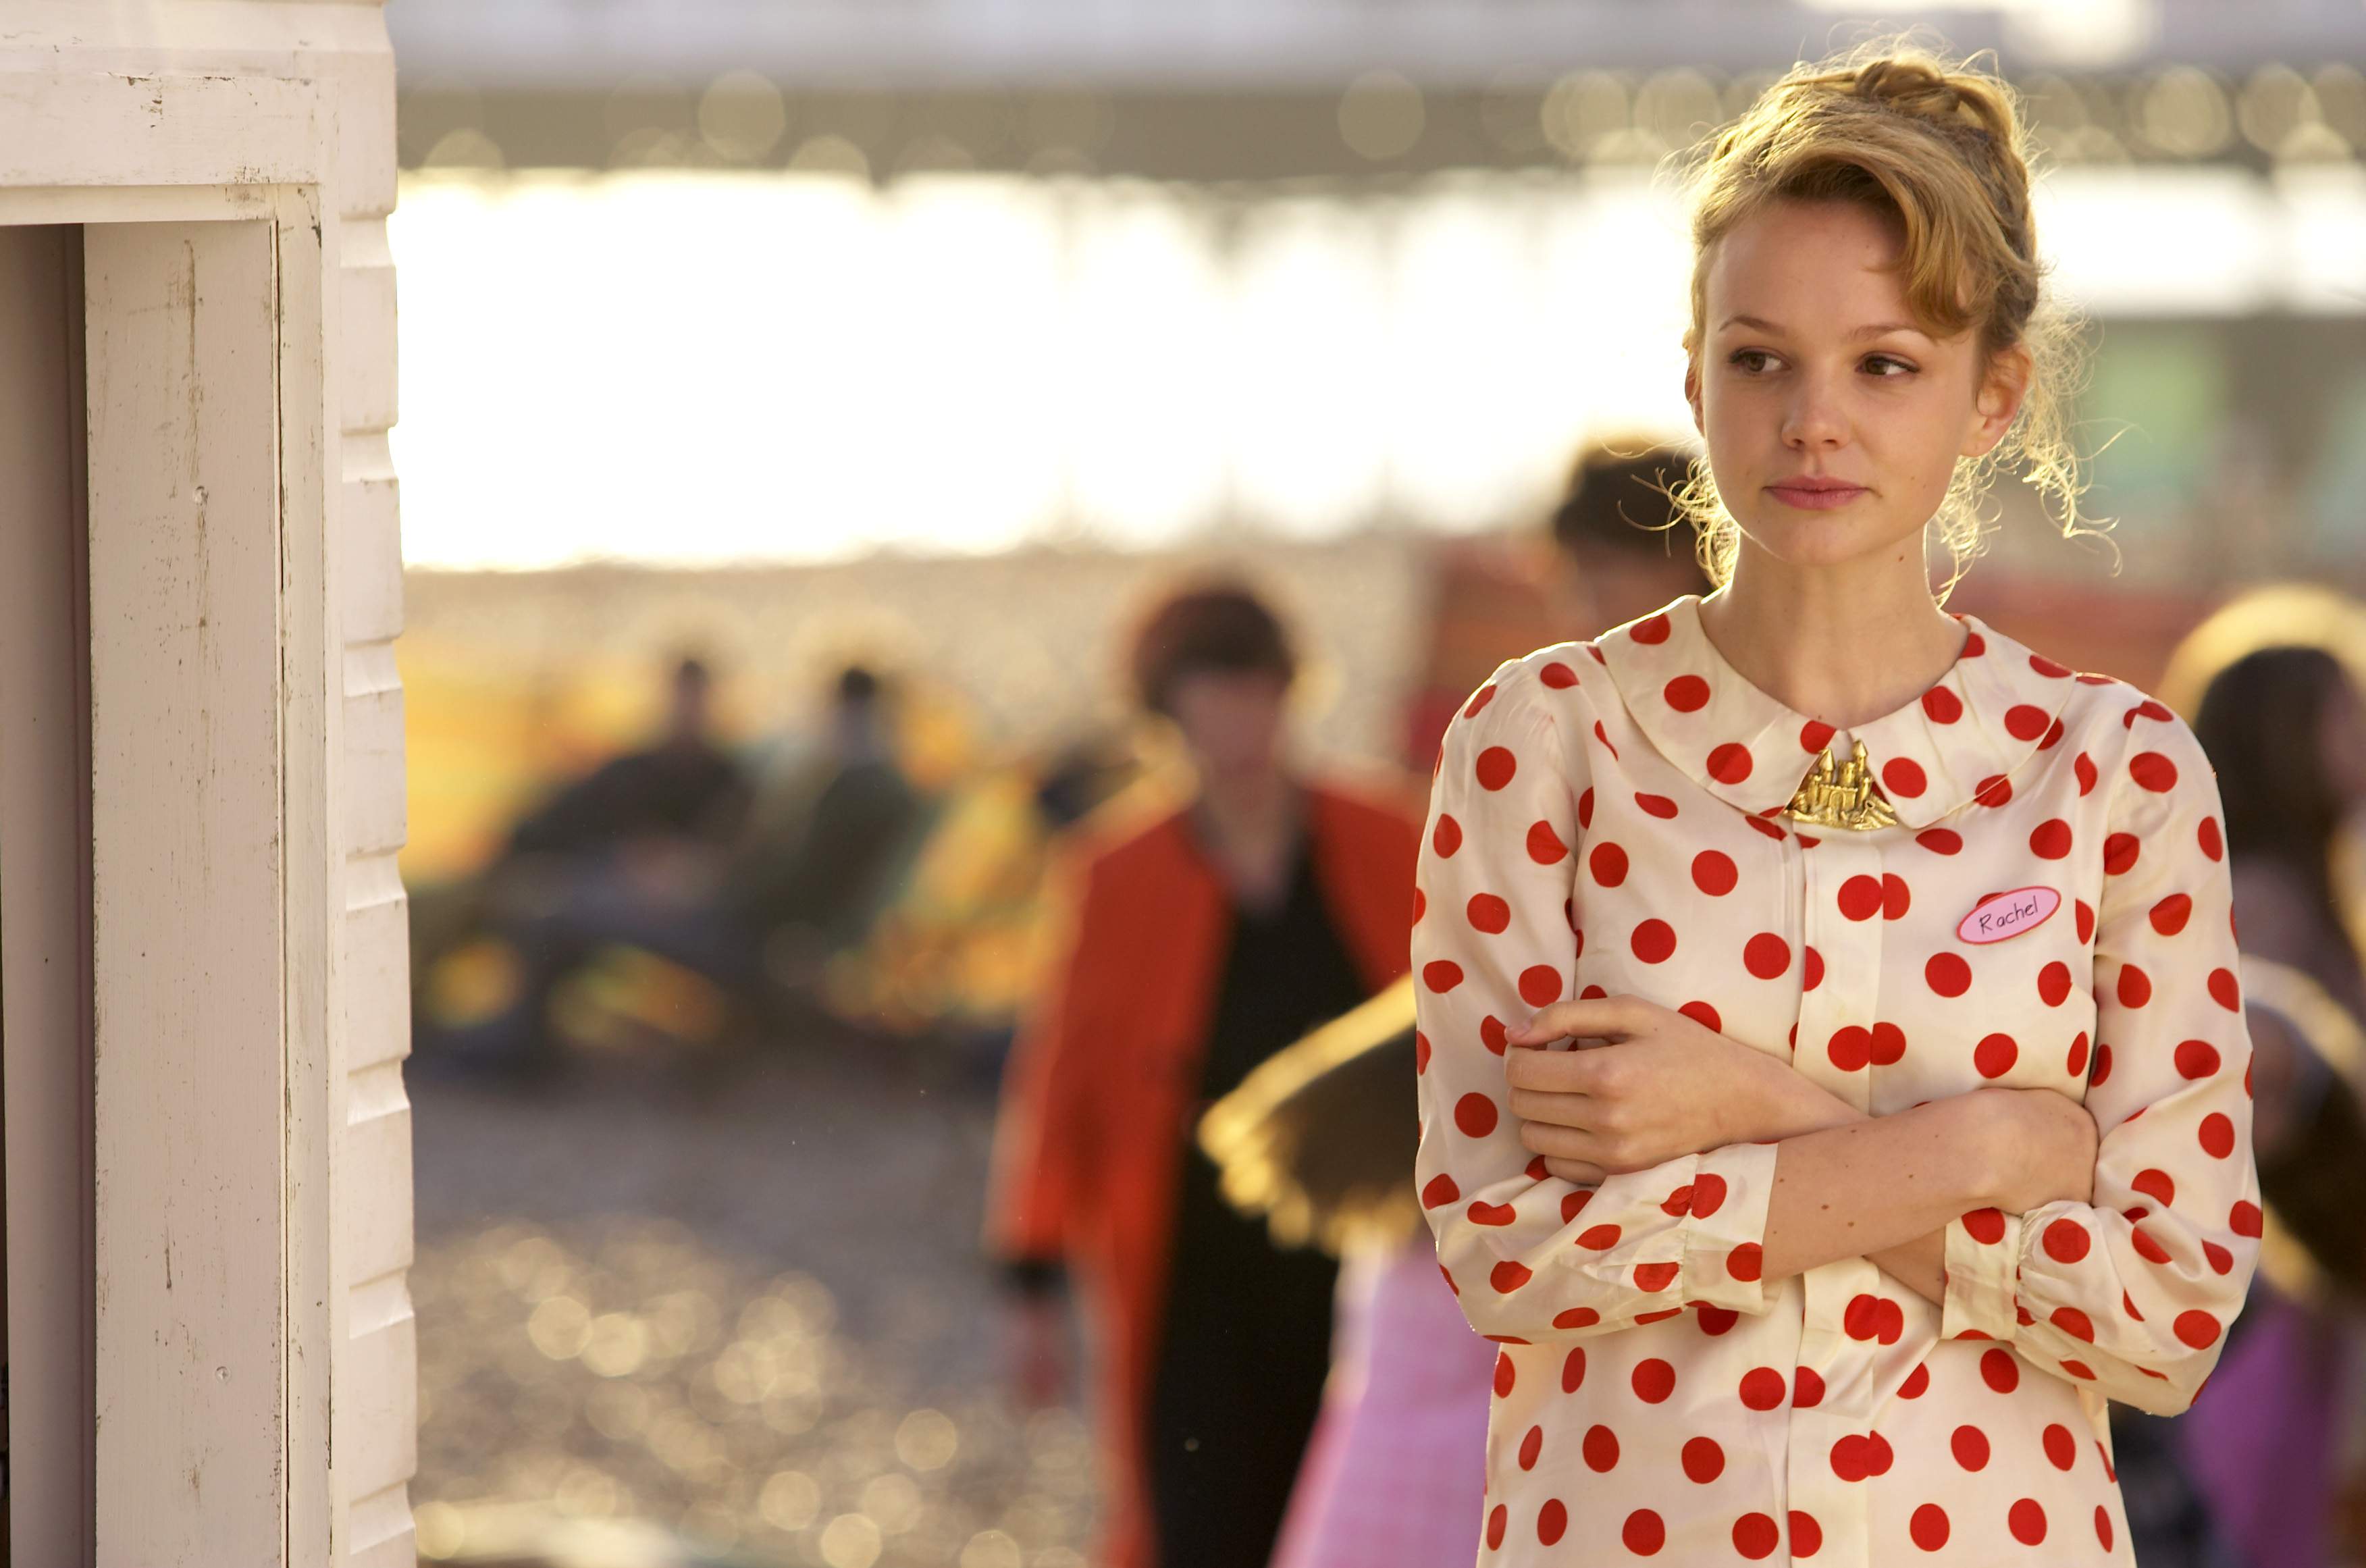 Carey Mulligan as Rachel in Sony Pictures Classics' When Did You Last See Your Father? (2007). Photo by Giles Keyte